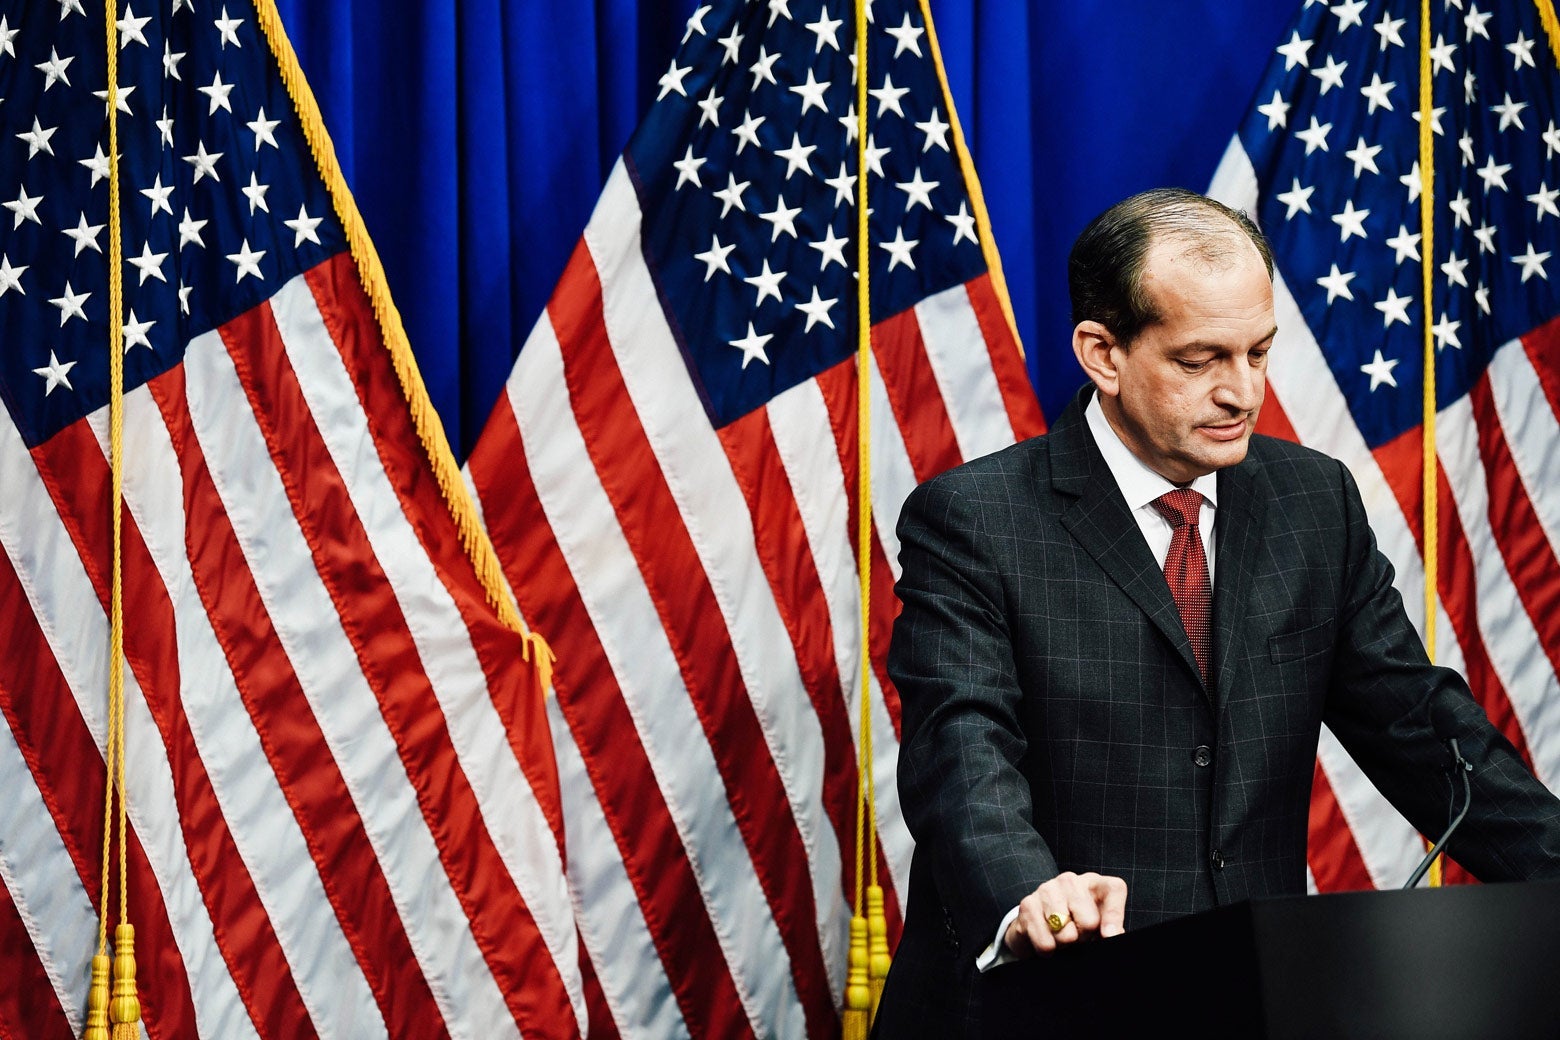 How Alex Acosta Got Away With It for So Long